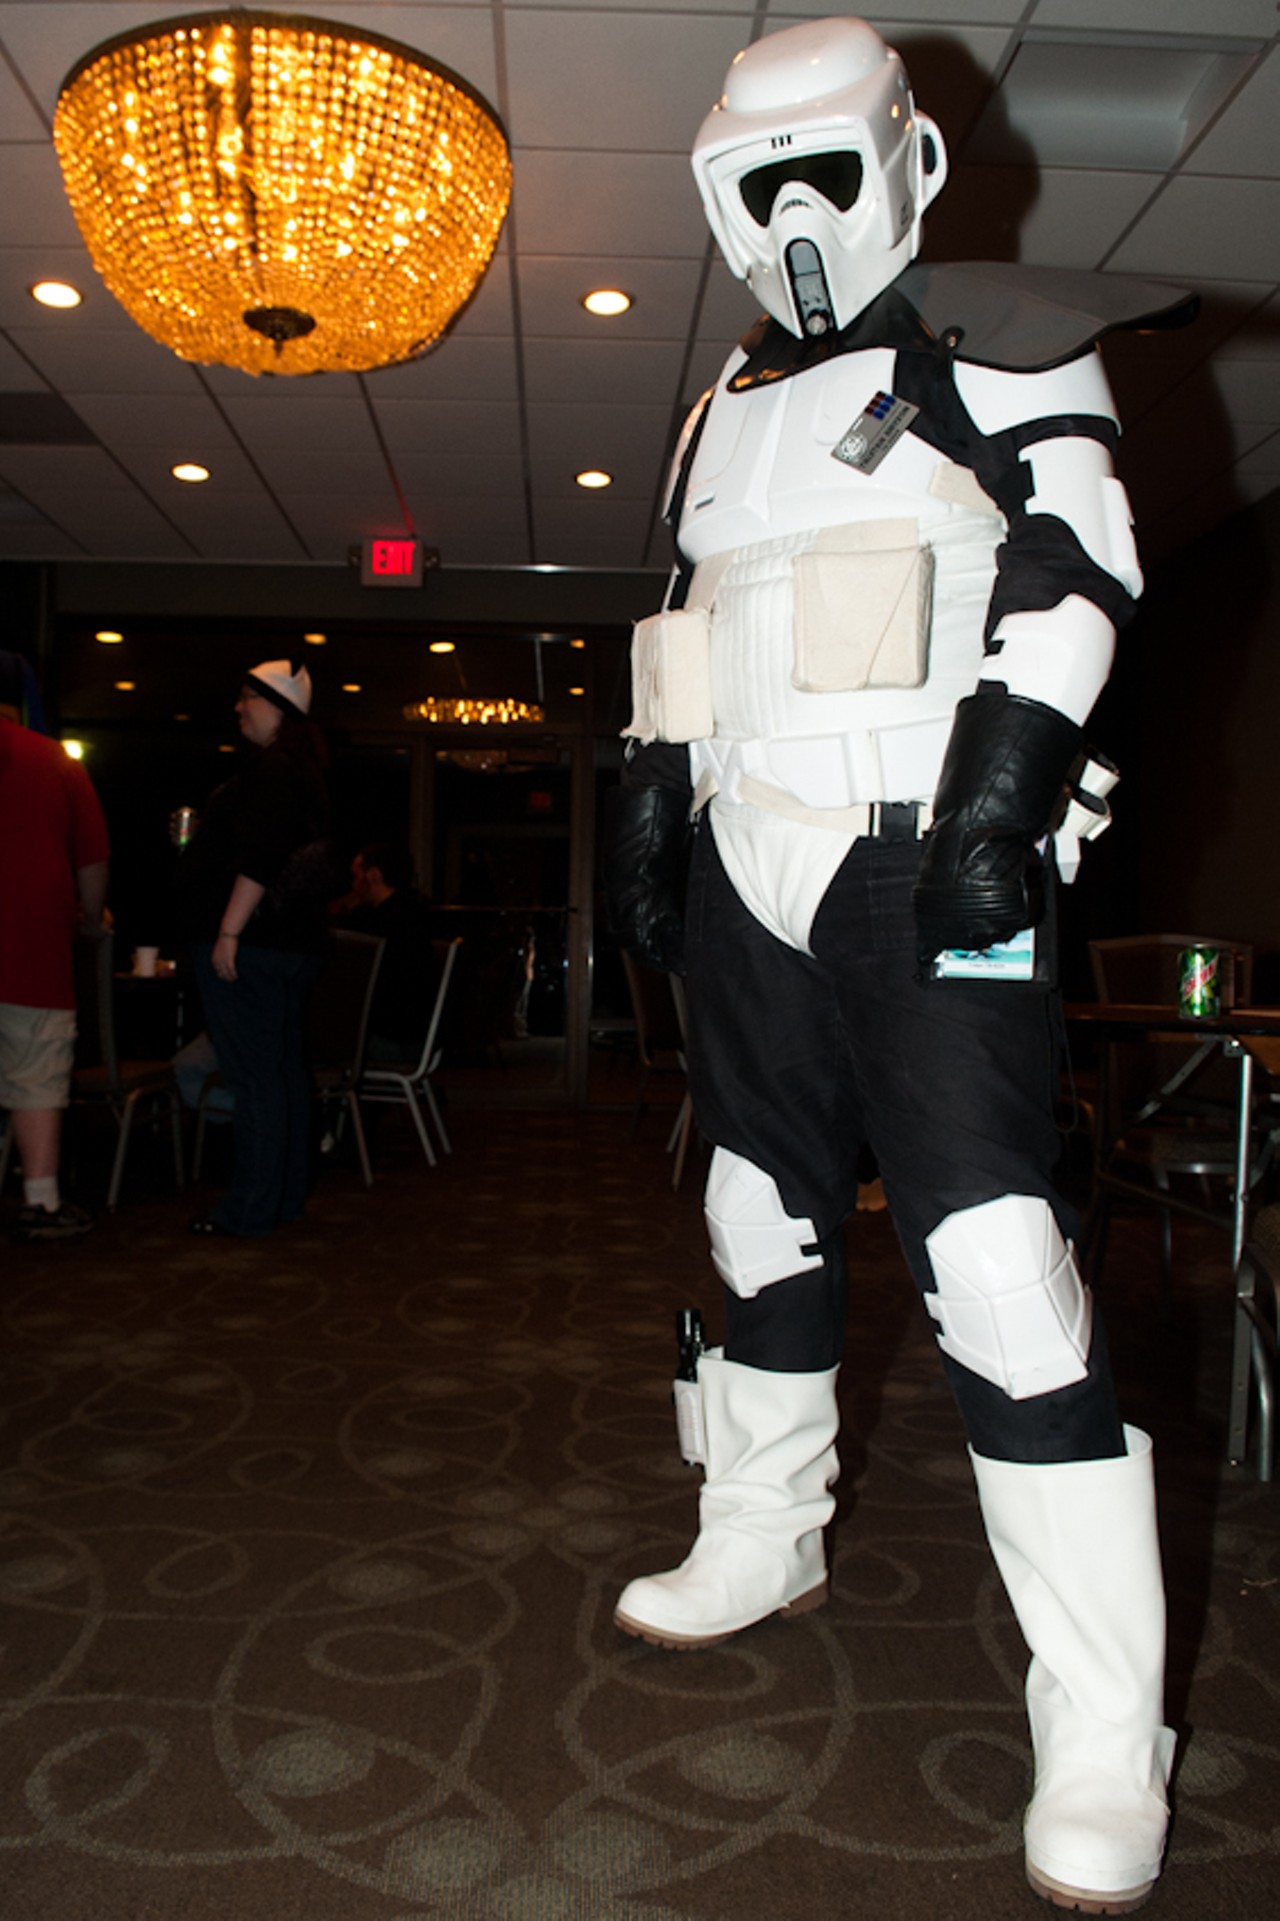 An Archon attendee posing for a quick photo in the Doubletree Hotel in Collinsville, Illinois, on September 30, 2011.